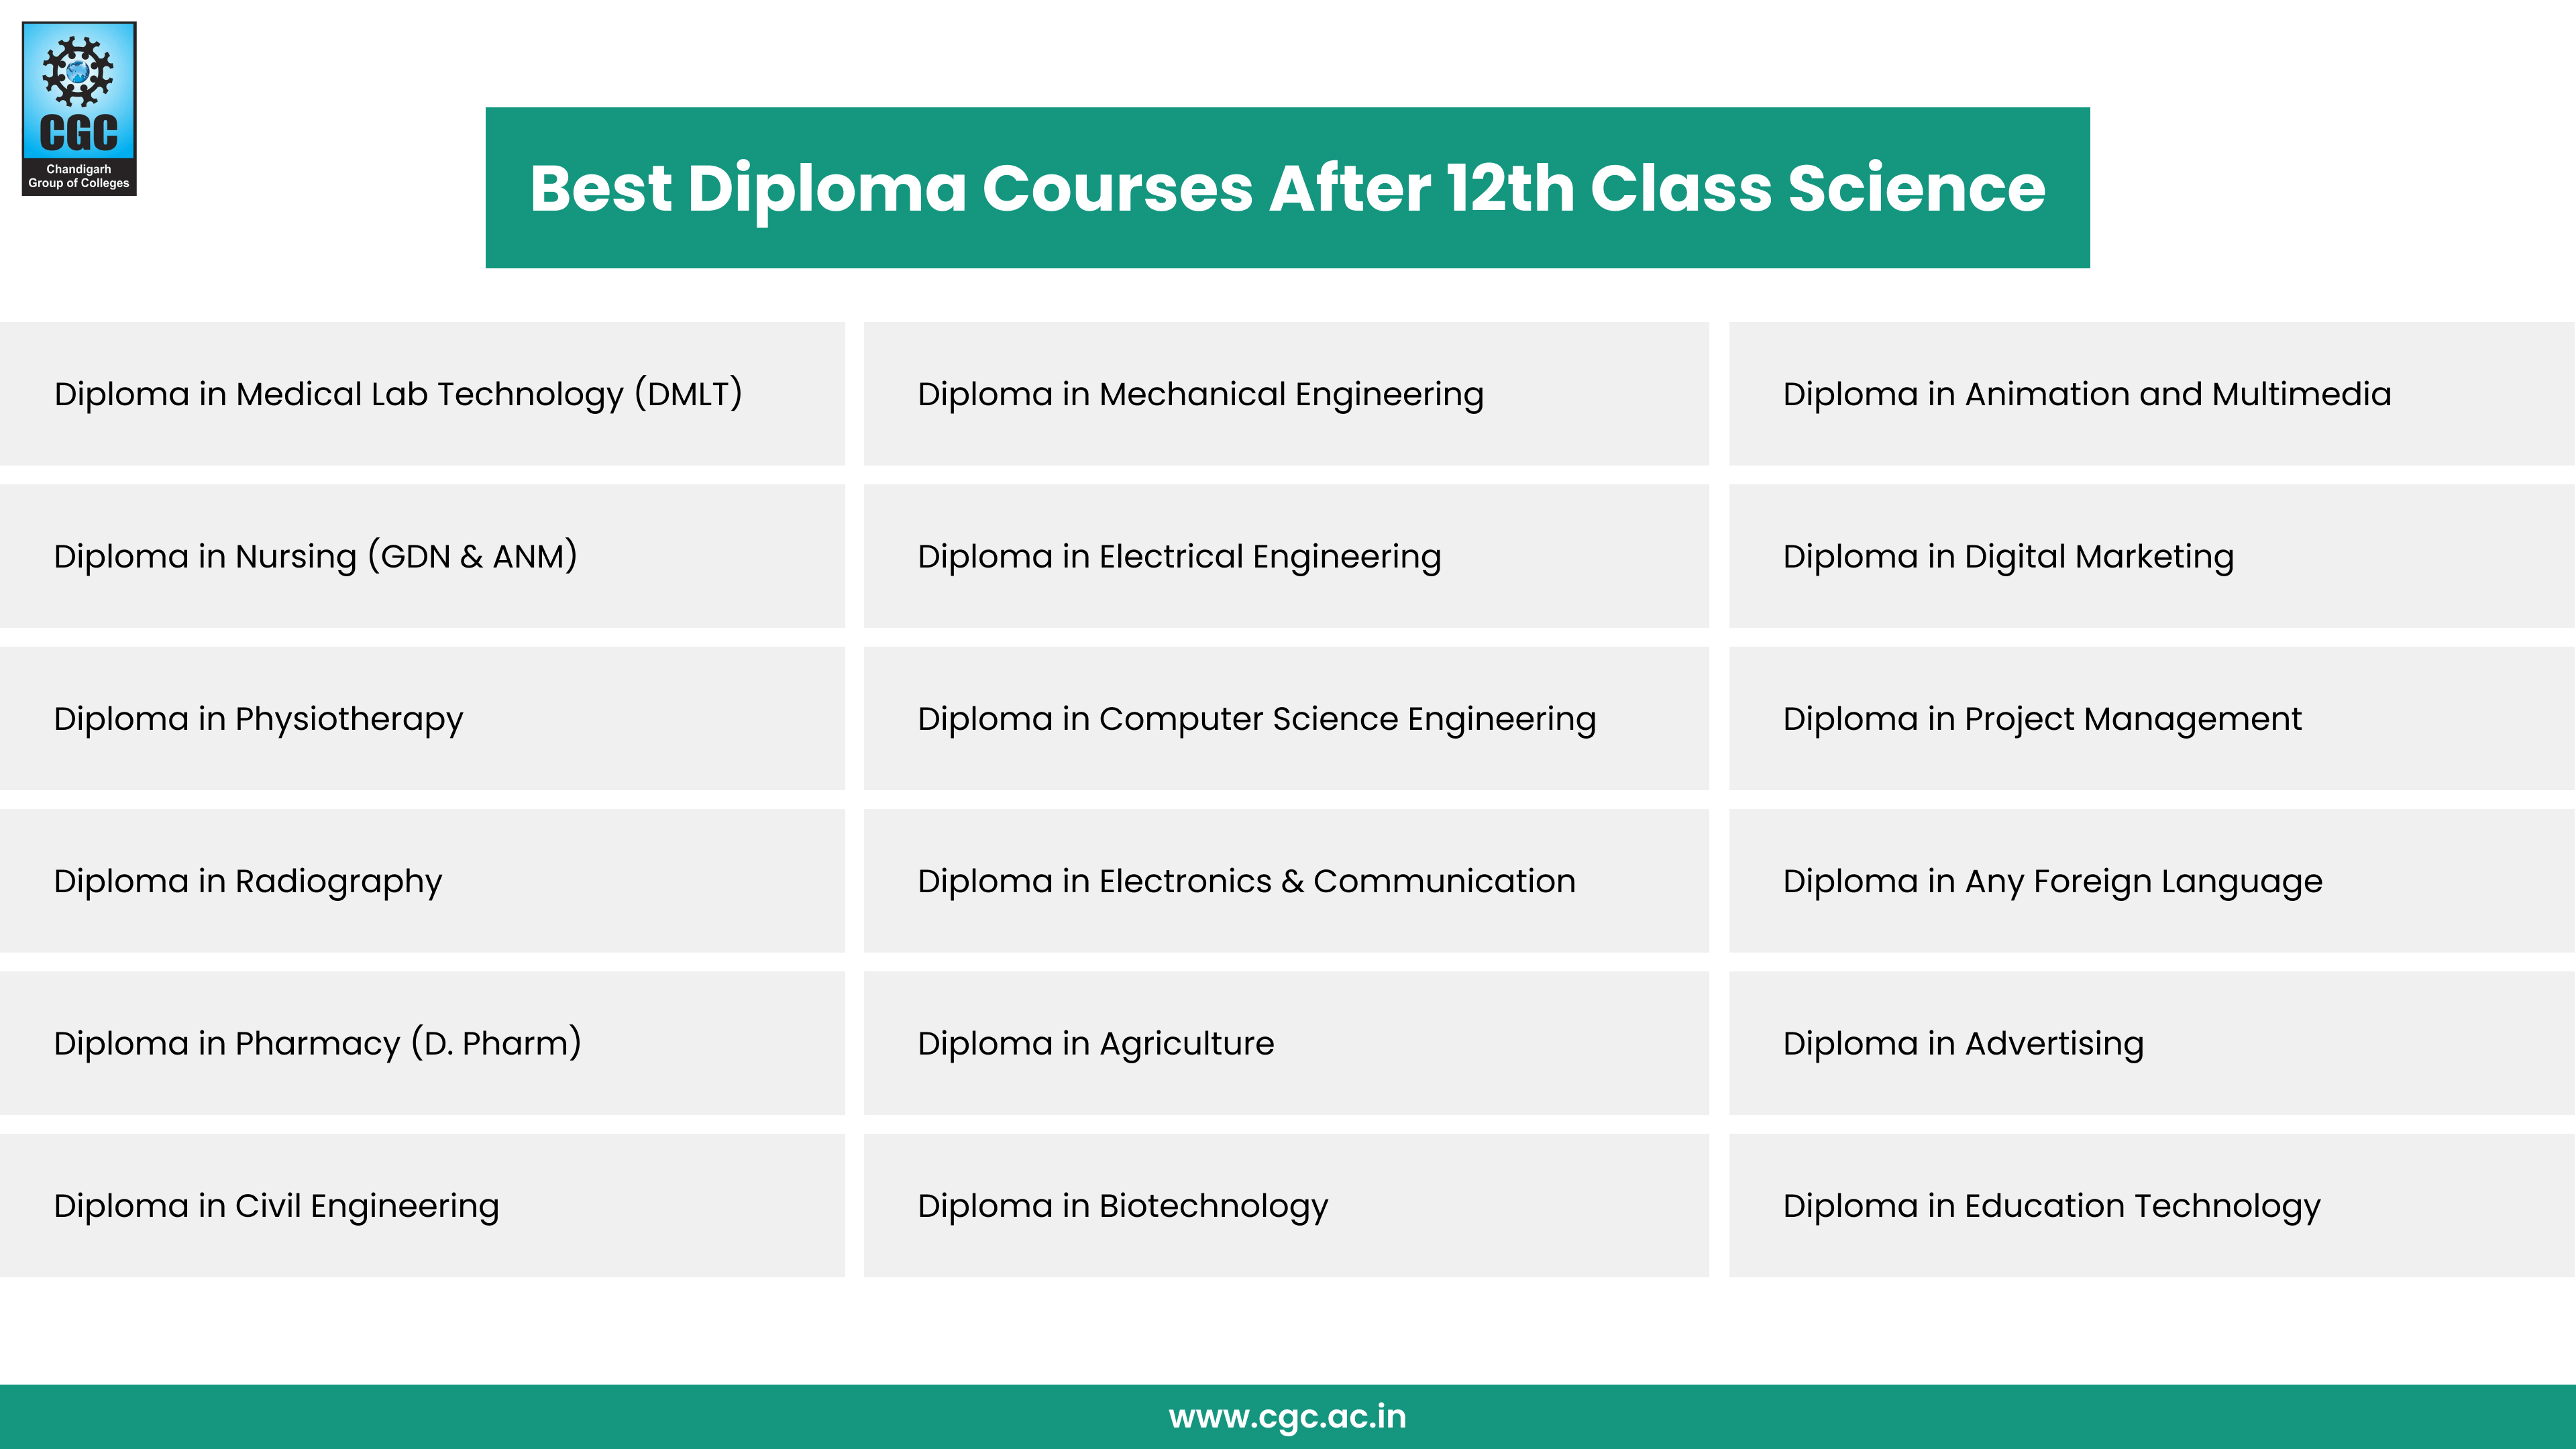 Top Diploma Courses After 12th Science